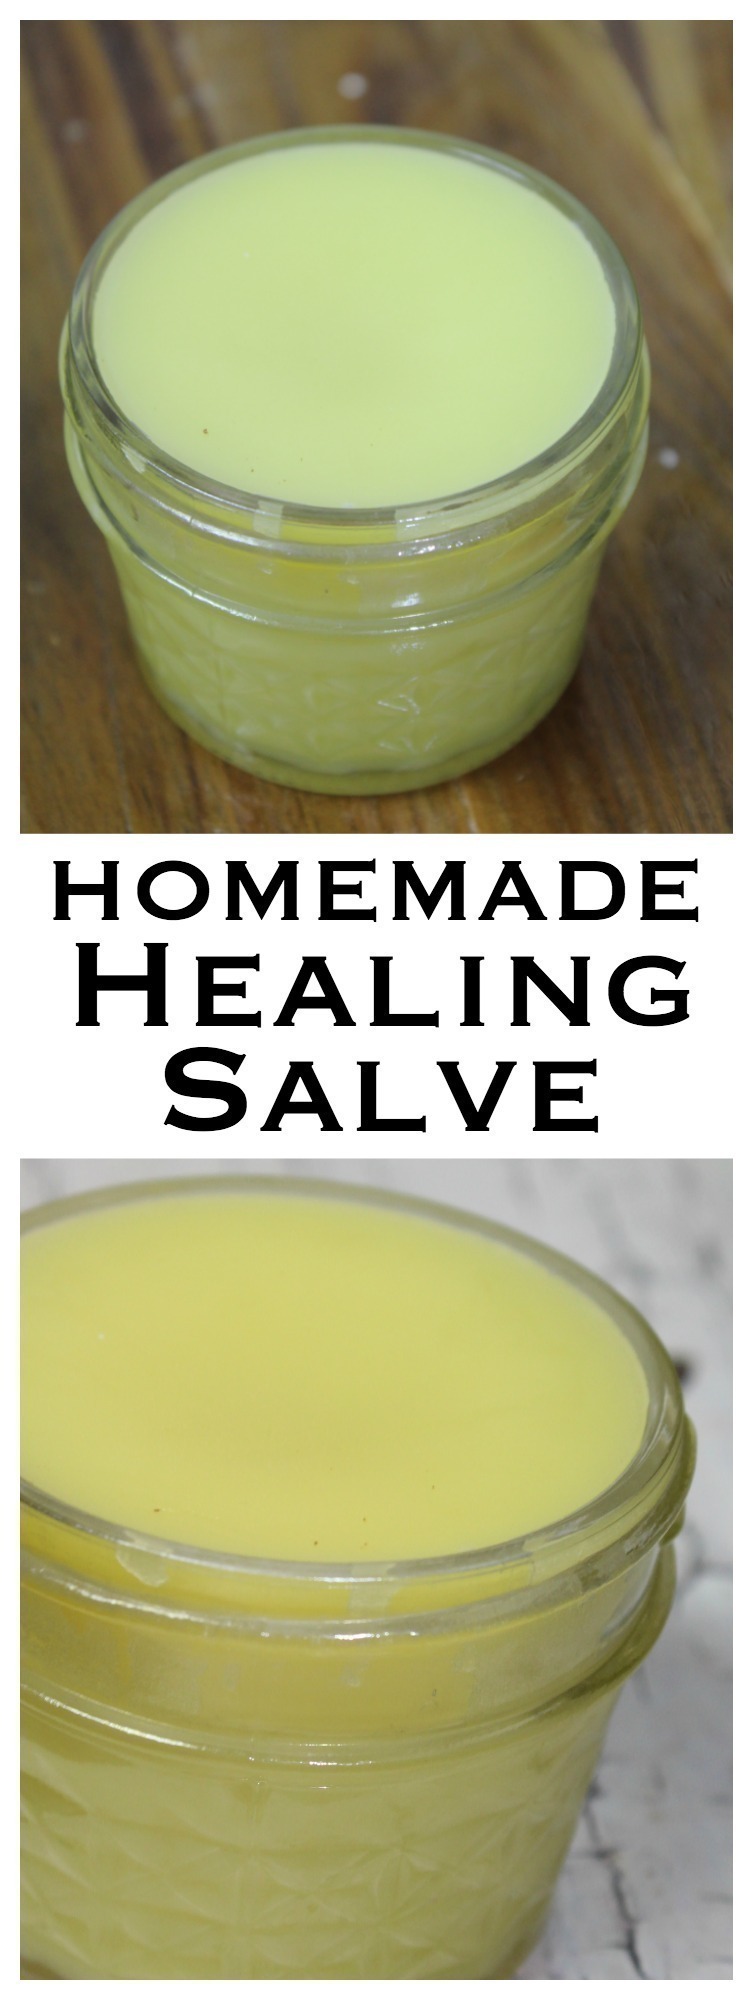 This homemade healing salve requires a few simple ingredients & is perfect for cuts, scrapes, burns, and times when your skin needs an extra little help.